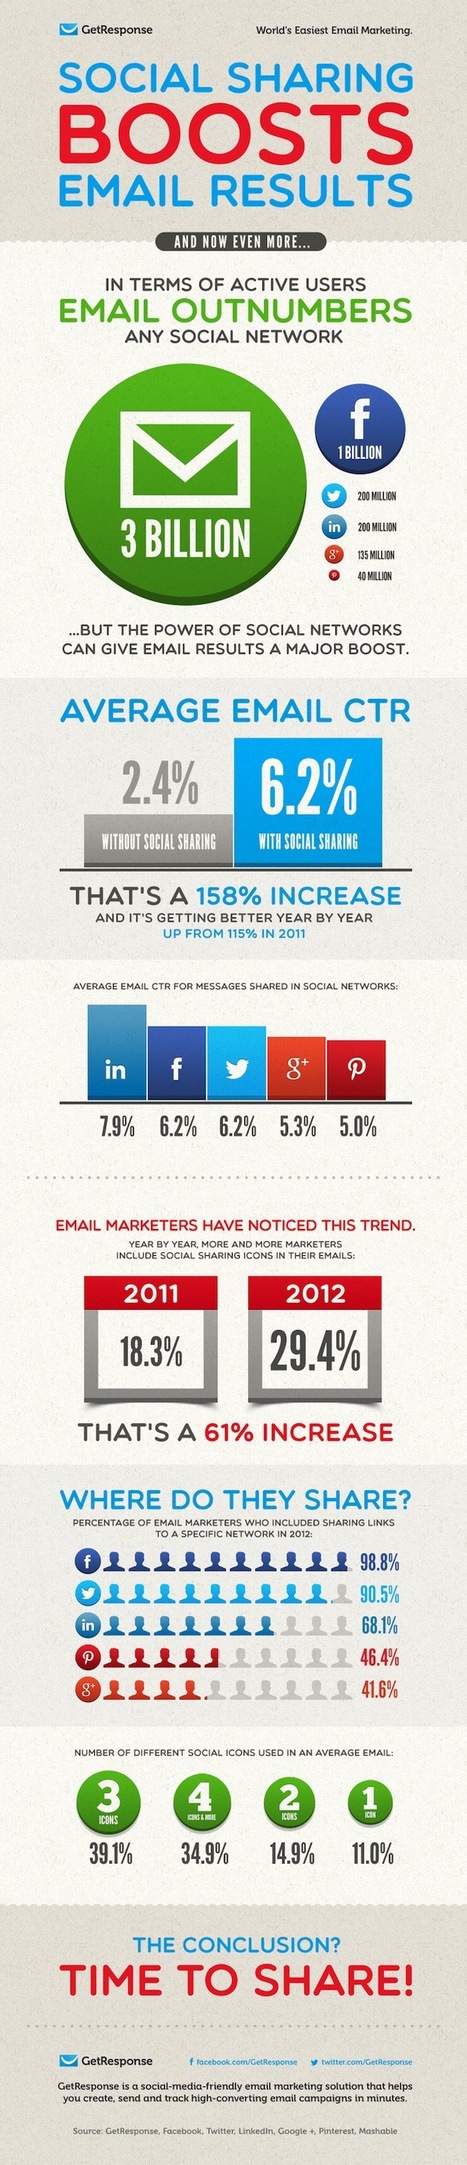 Social Sharing Boosts Email Results [Infographic] - Profs | The MarTech Digest | Scoop.it